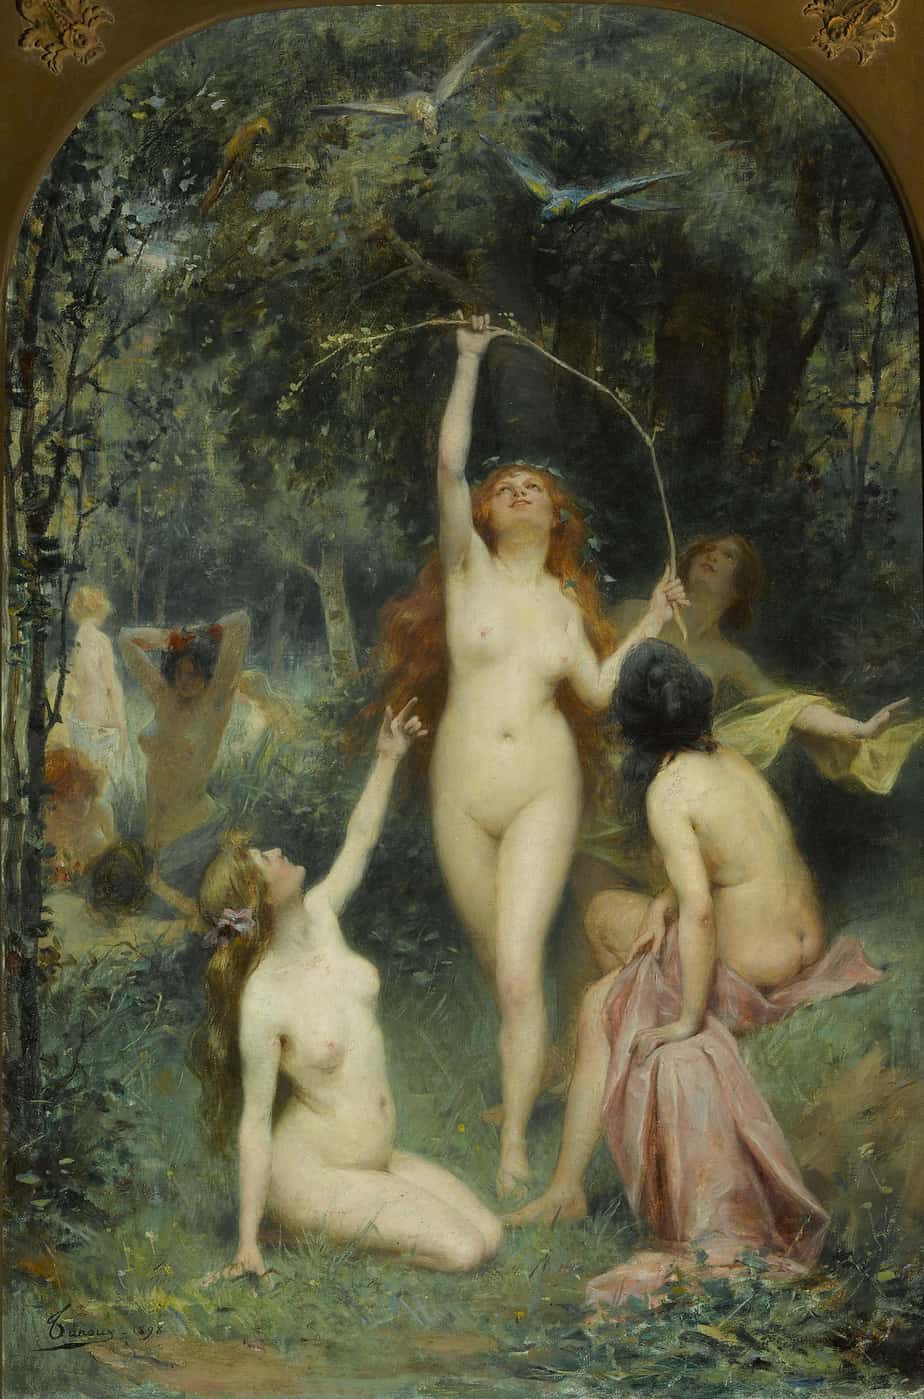 Henri Adrien Tanoux, Nymphs In A Forest, 1898